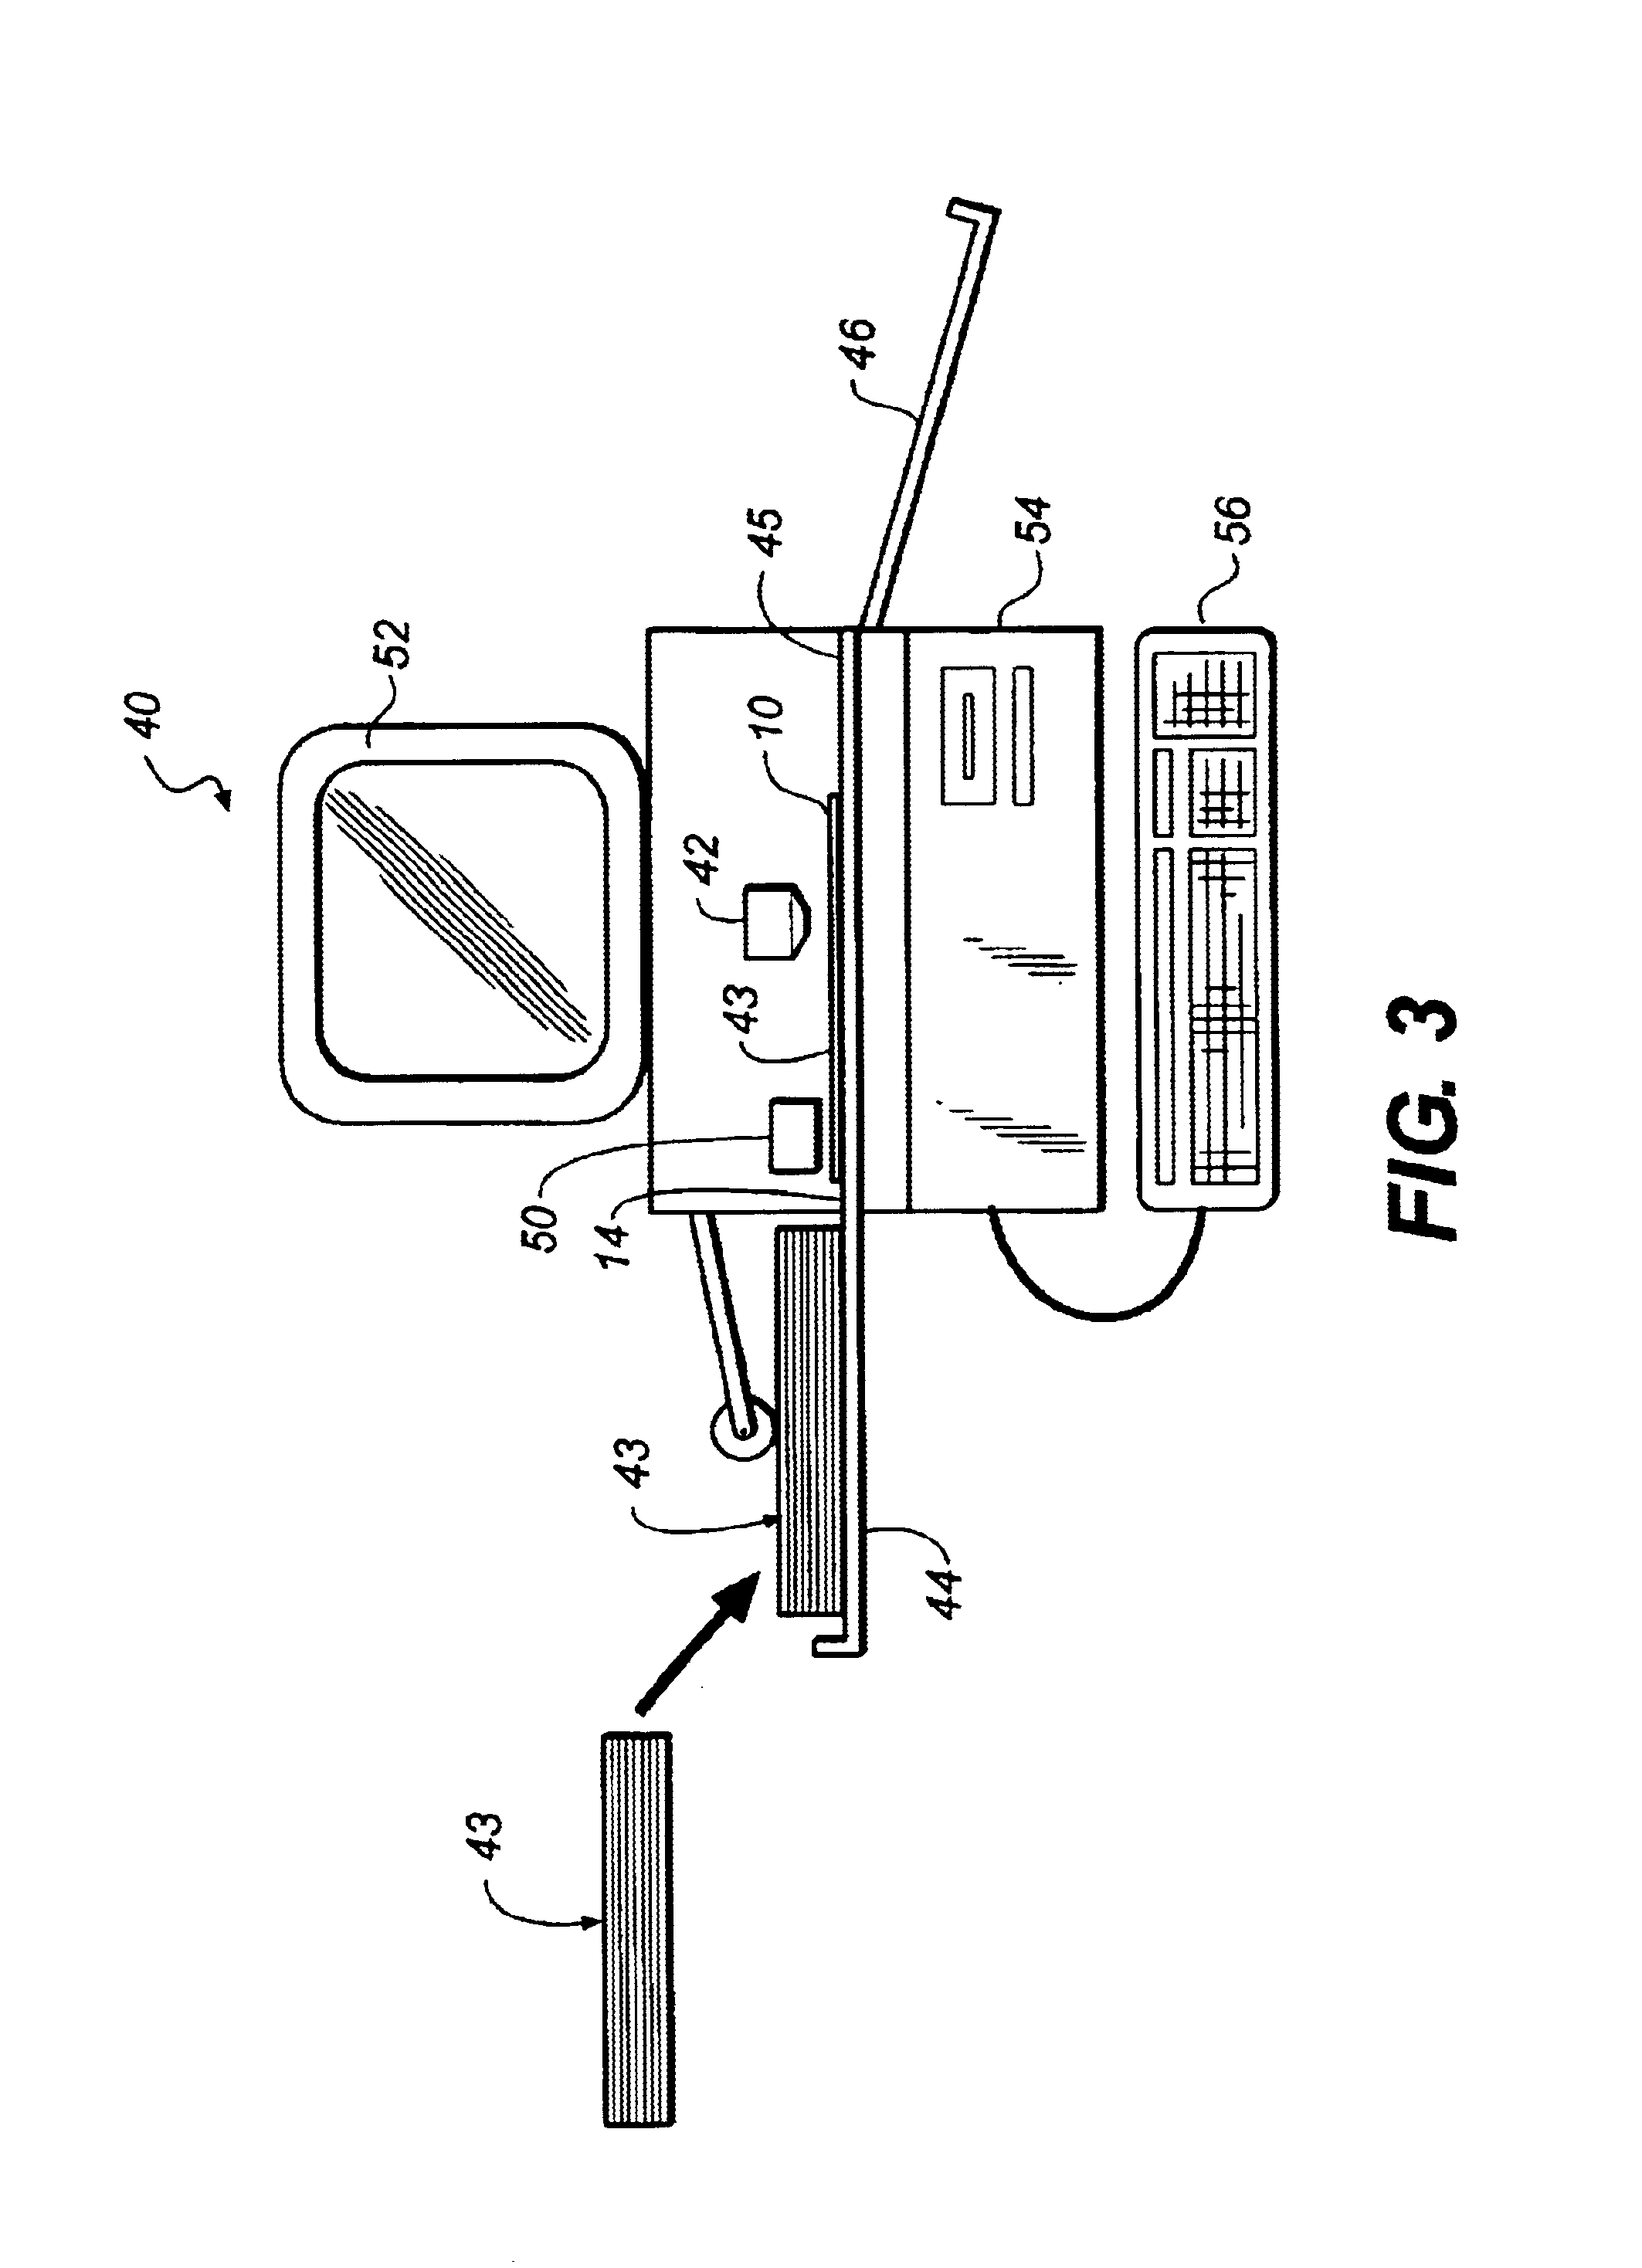 Method and apparatus for making a print having an invisible coordinate system